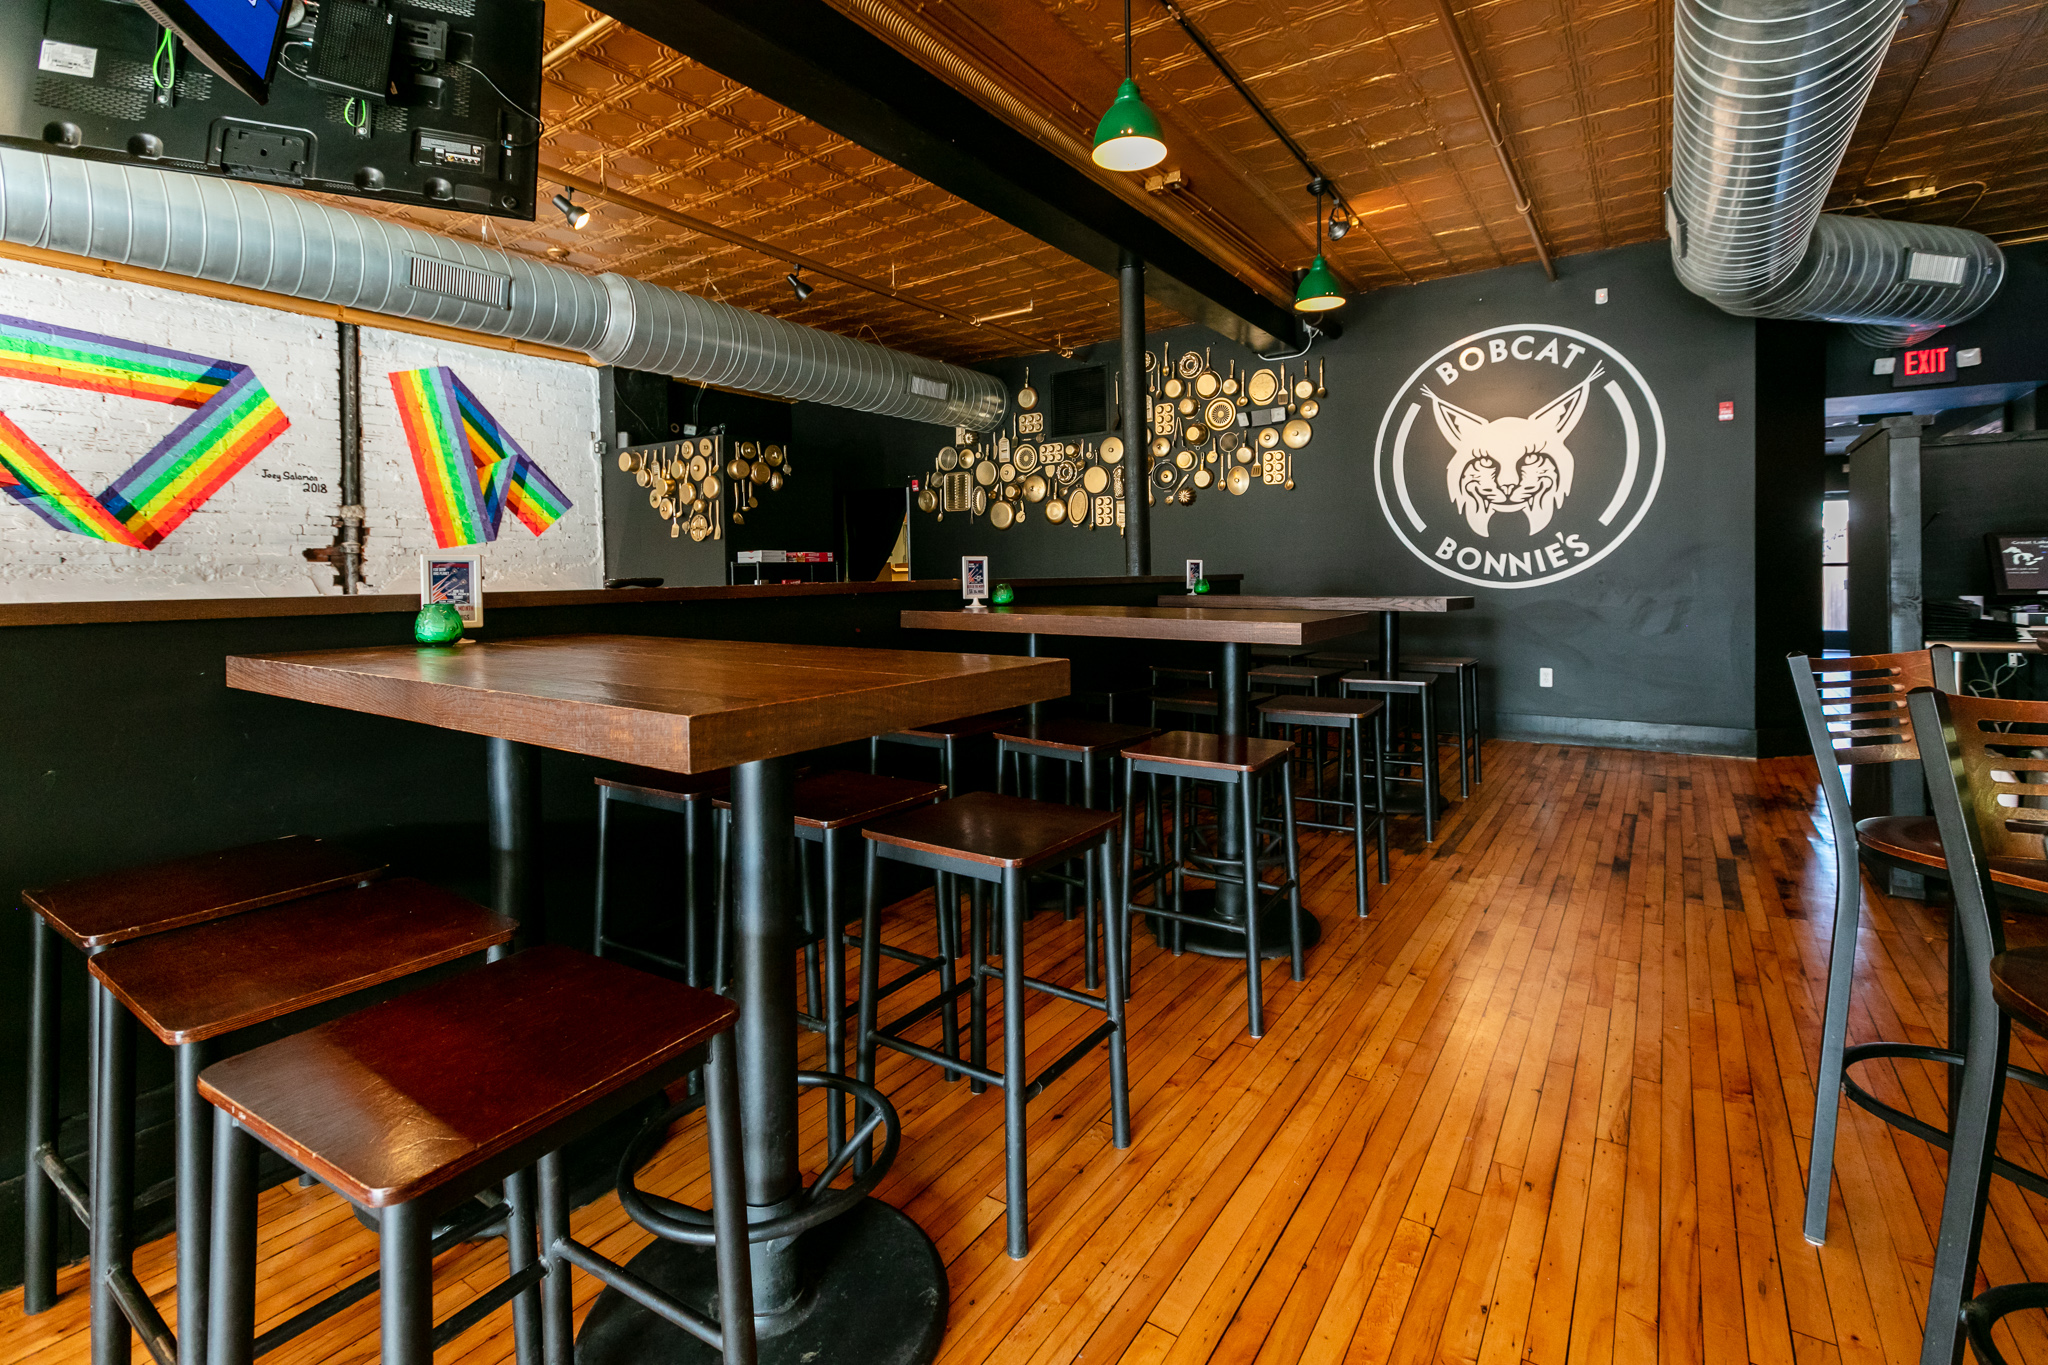 Rainbow strips are painted on a white wall with a Bobcat Bonnie’s logo painted in black and white nearby at the Ferndale restaurant’s dining room.